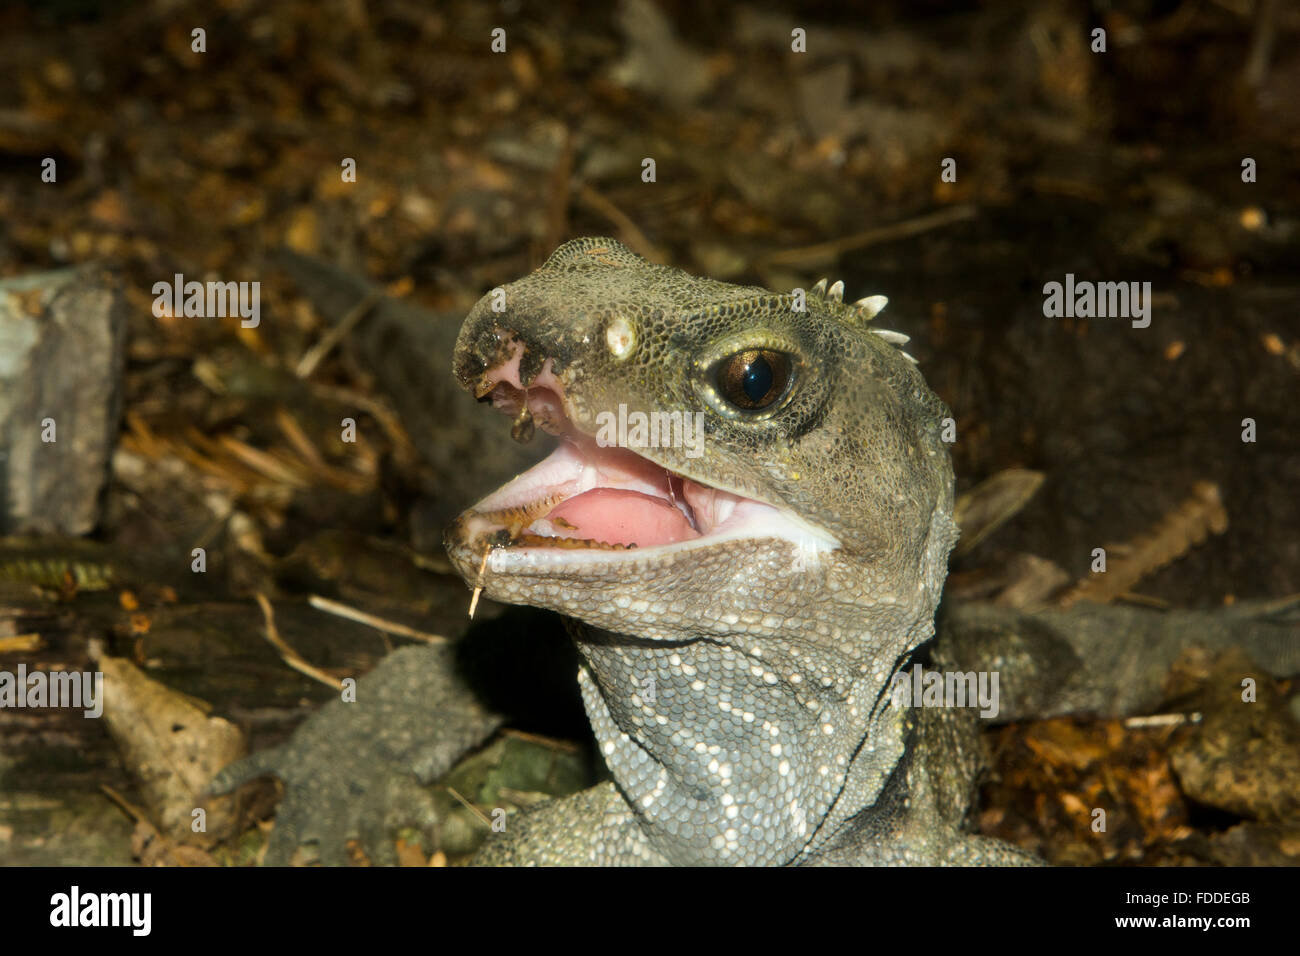 Tuatara is a reptile endemic to New Zealand. Resembling common lizards the Tuatara represents its own animal order. Stock Photo